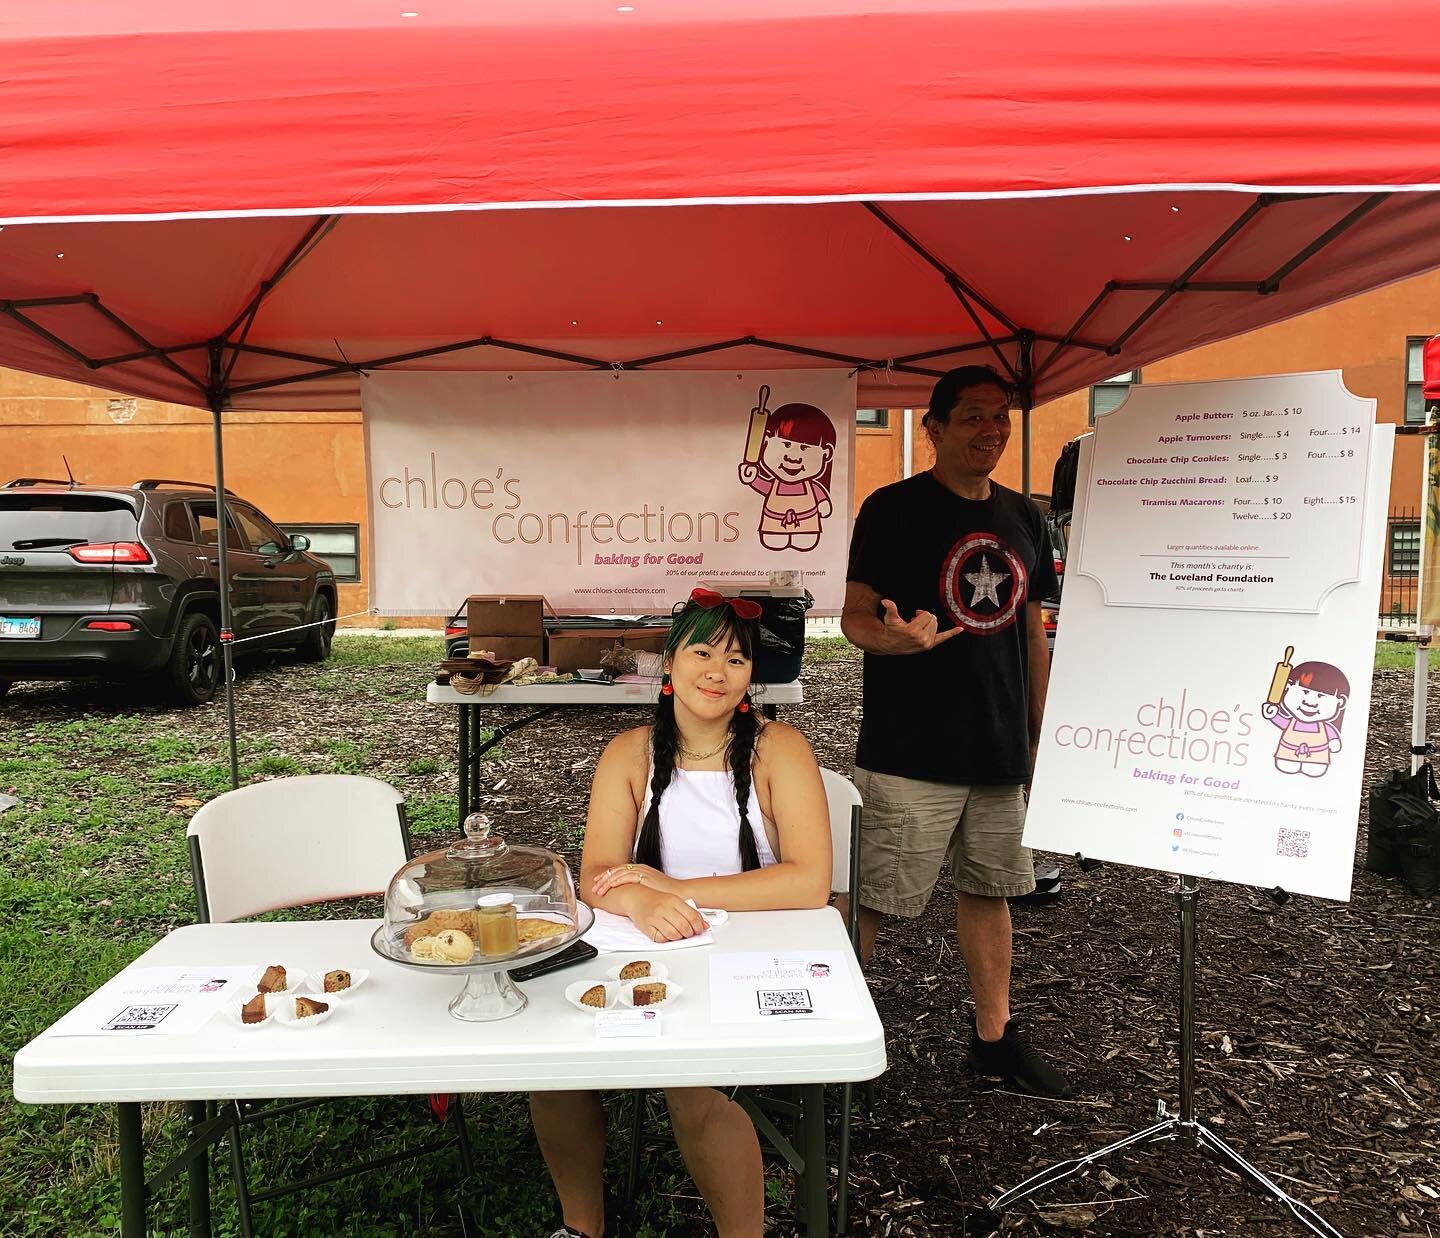 Today we our spotlighting our wonderful vendor Chloe Ma of @chl.oesconfections! Hurry over to the Bronzeville Farmers Market, open today from 10am to 2pm, to try some delicious baked goods! Thirty percent of their profits go to charity, so you can fe